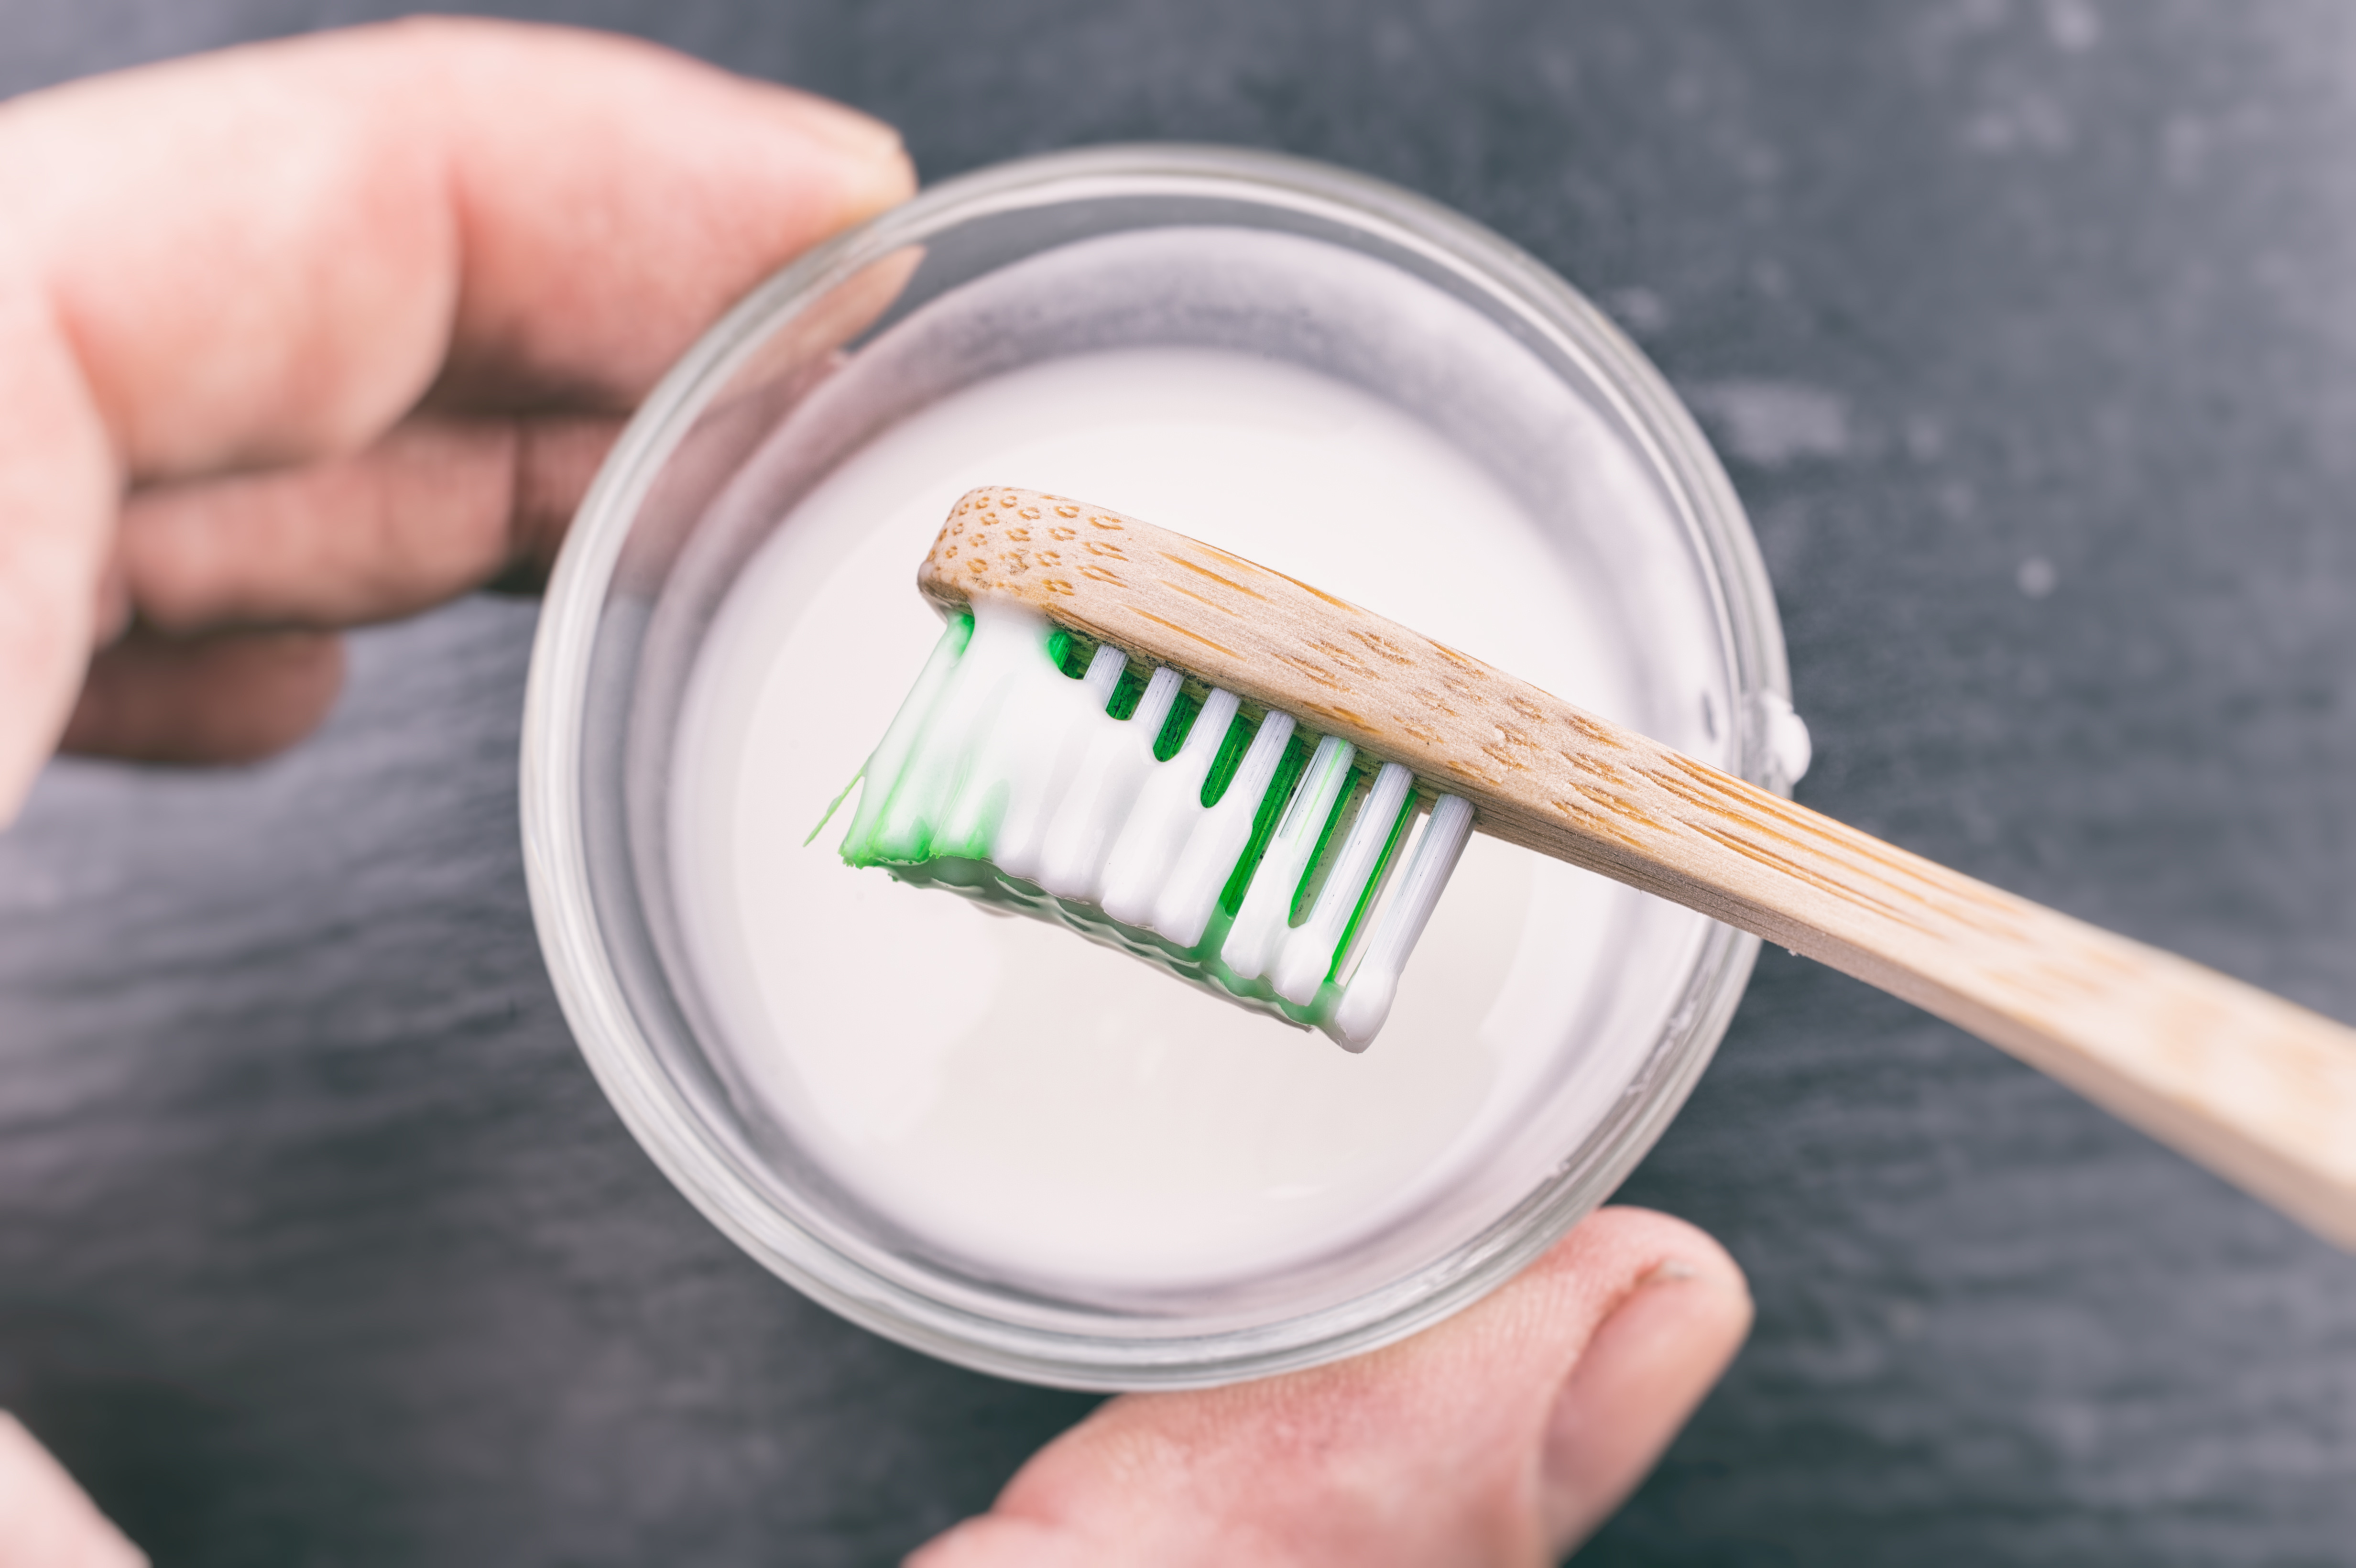 Whitening Your Teeth with Baking Soda, is it Really a Good Idea?